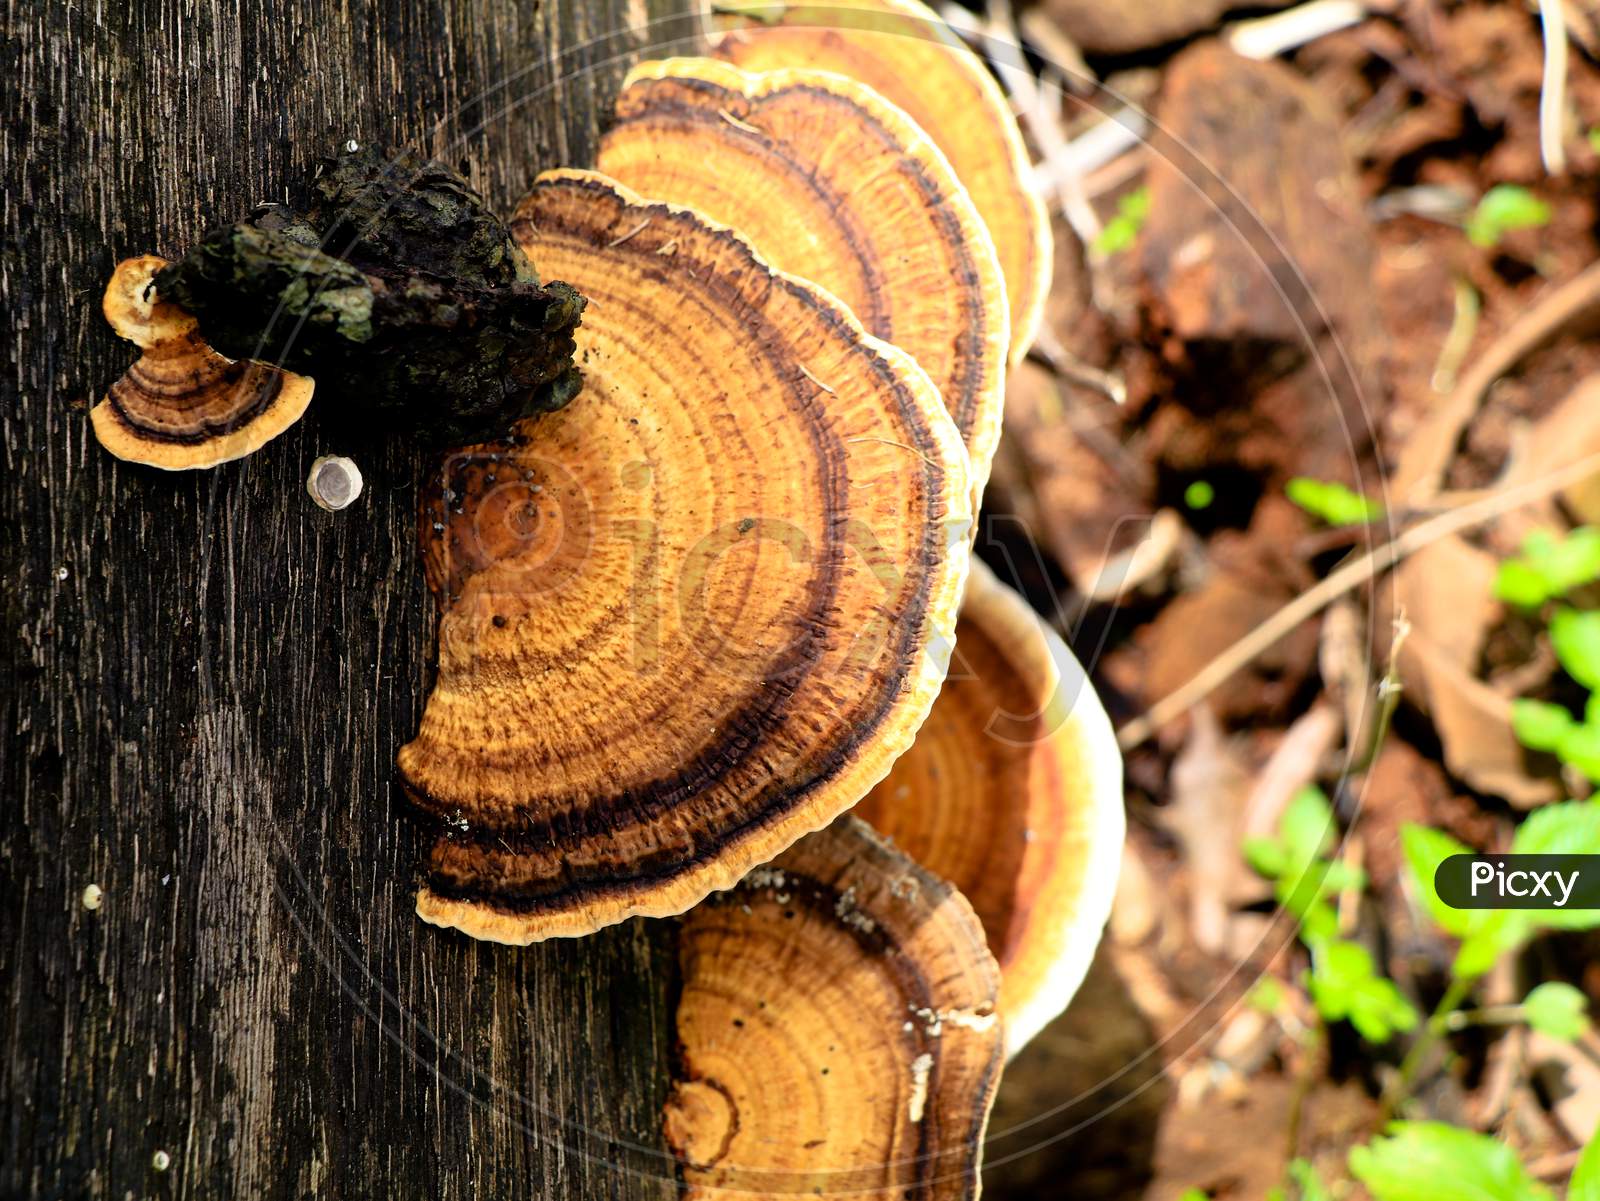 Multi Colored Mushroom Or Conk On A Decaying Coconut Trunk, Selective Focus